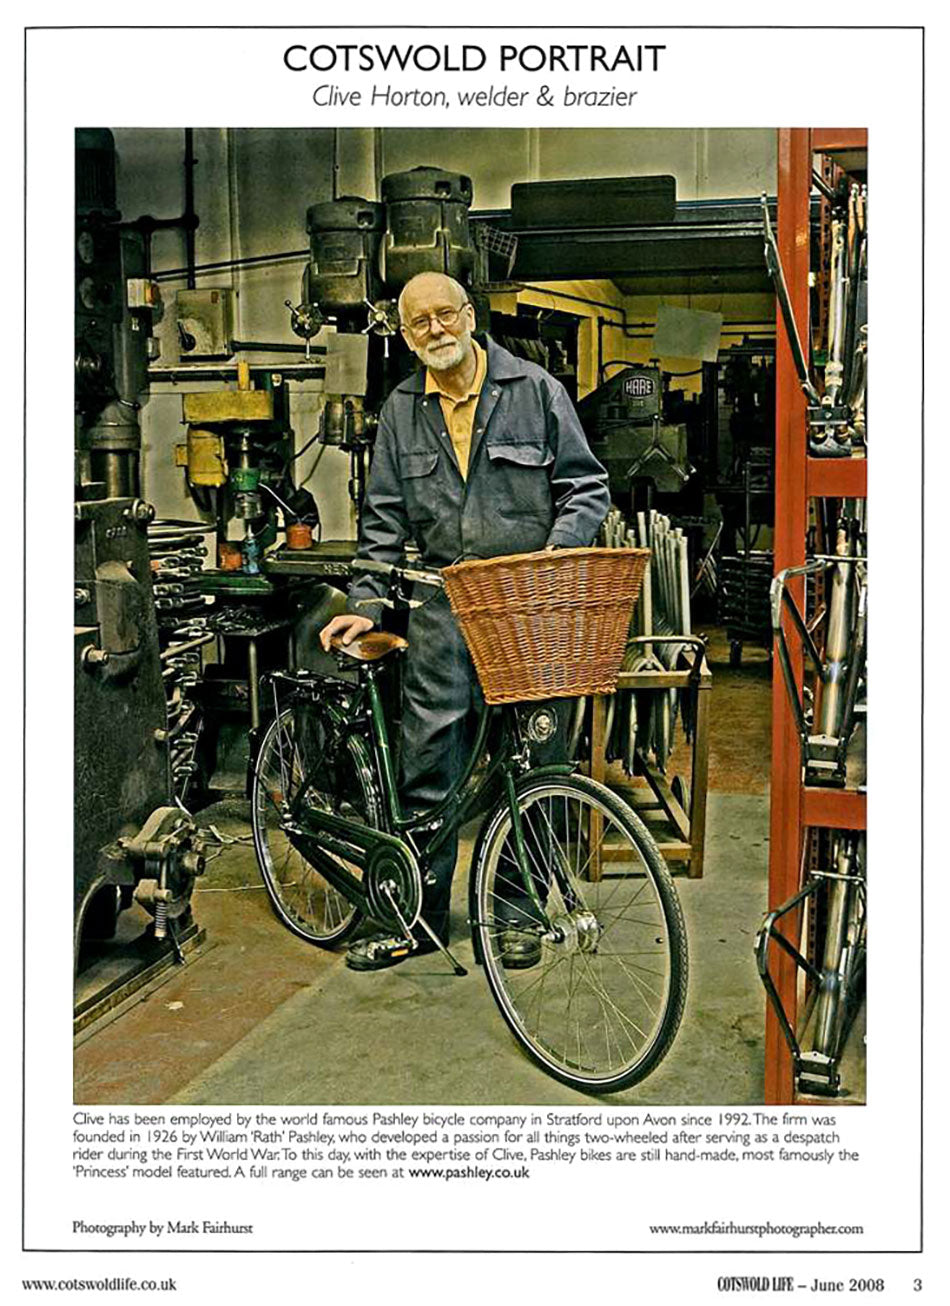 Pashley brazer standing with Princess Sovereign bicycle inside the Pashley bicycle factory